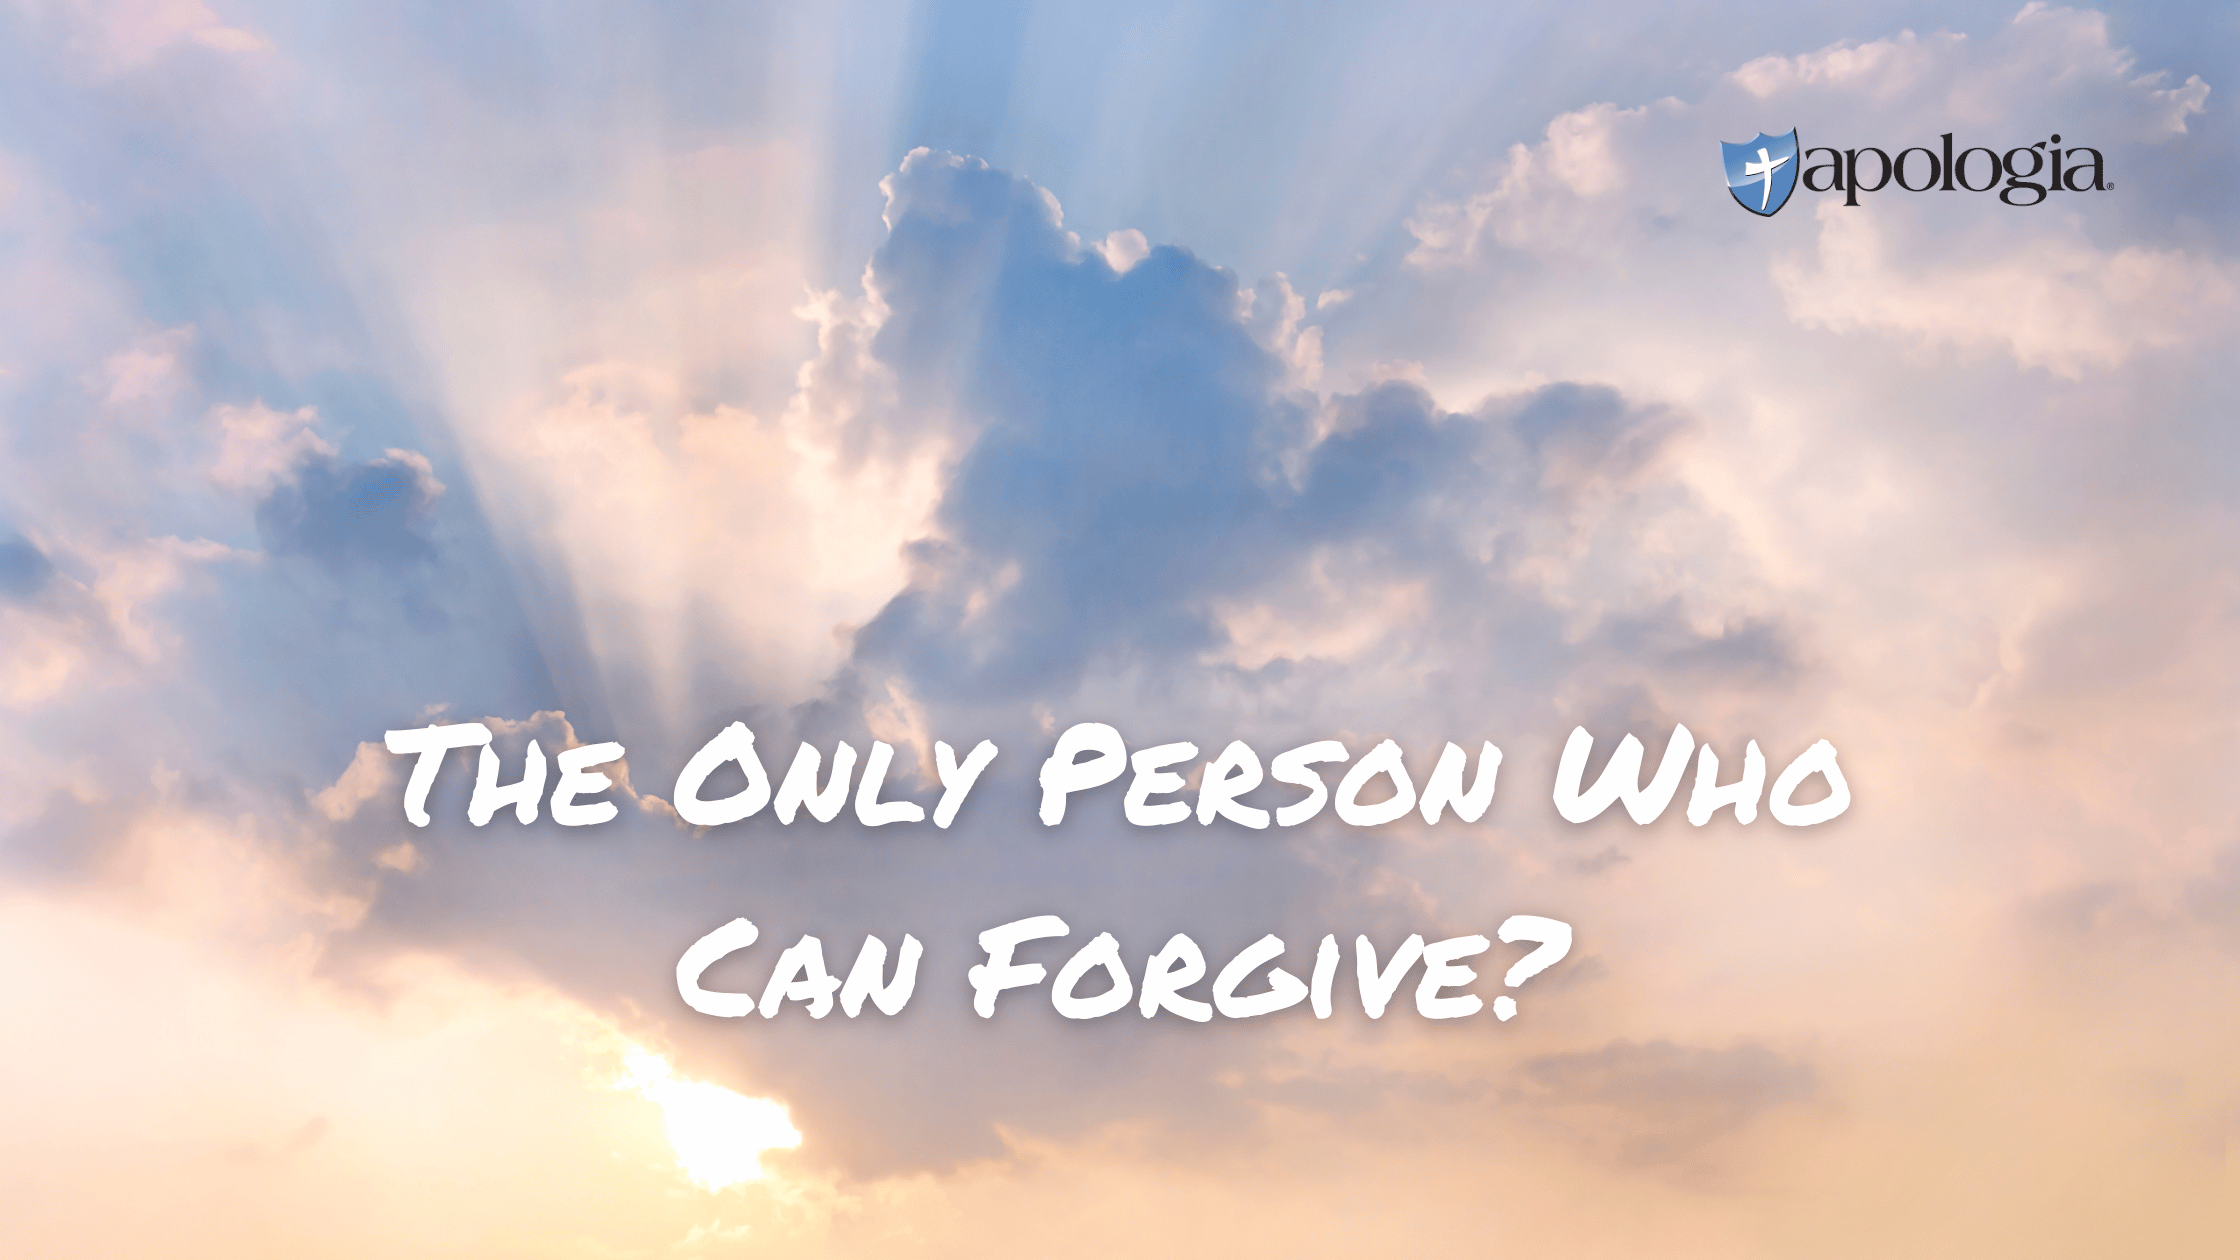 The Only Person Who Can Forgive?